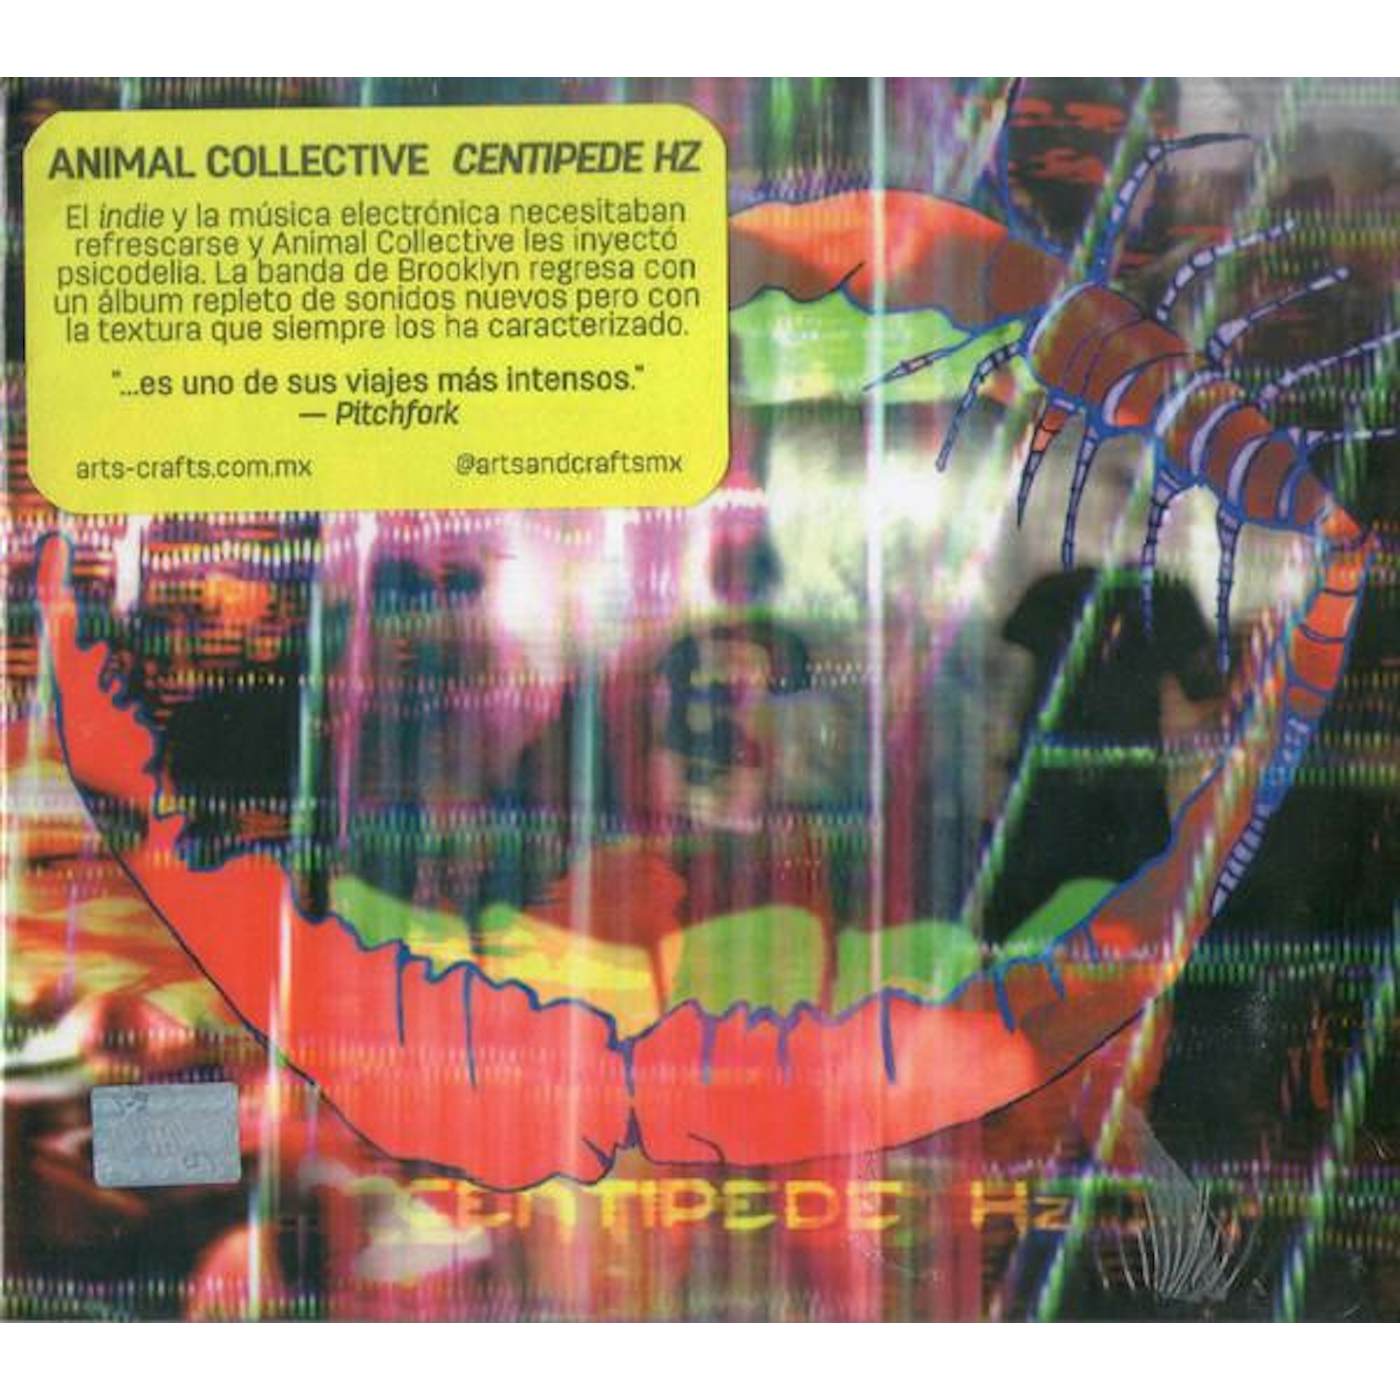 Animal Collective CENTIPEDE HZ CD - Limited Edition